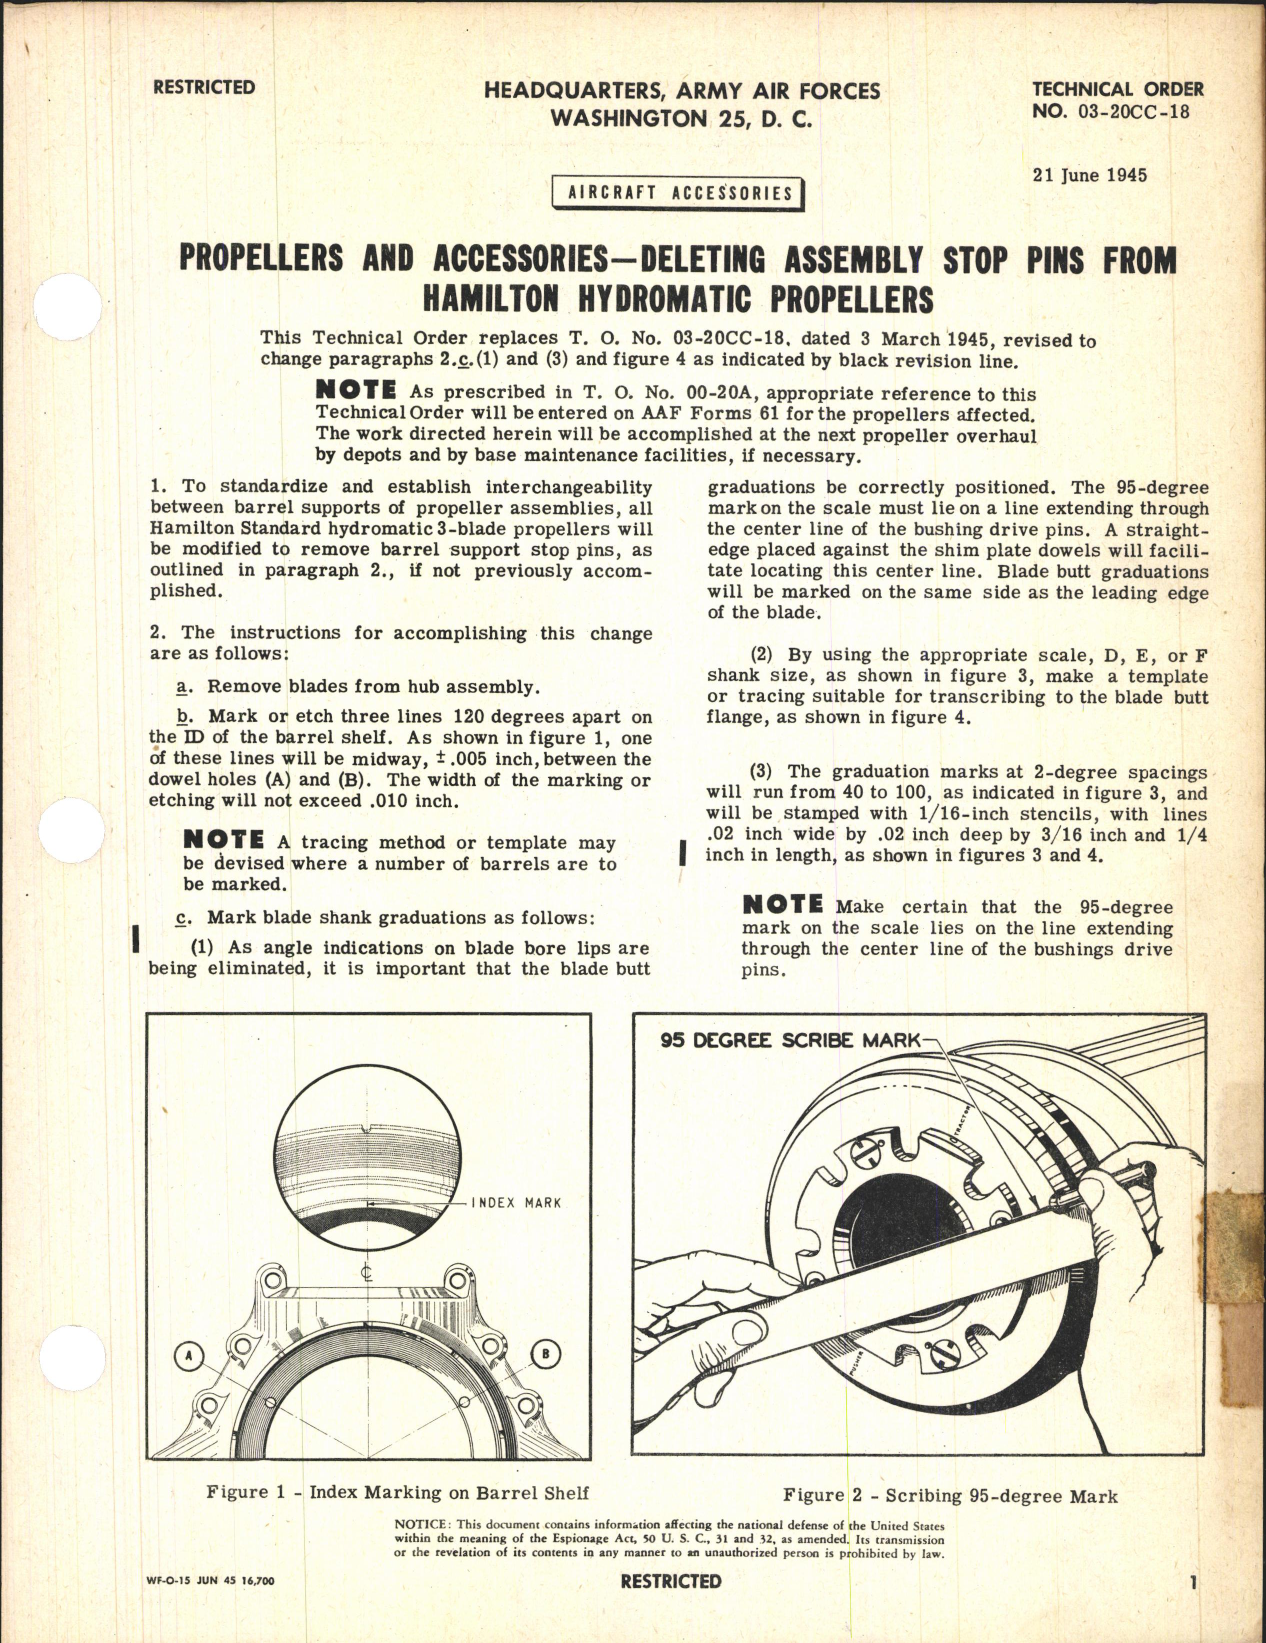 Sample page 1 from AirCorps Library document: Deleting Assembly Stop Pins From Hamilton Standard Propellers